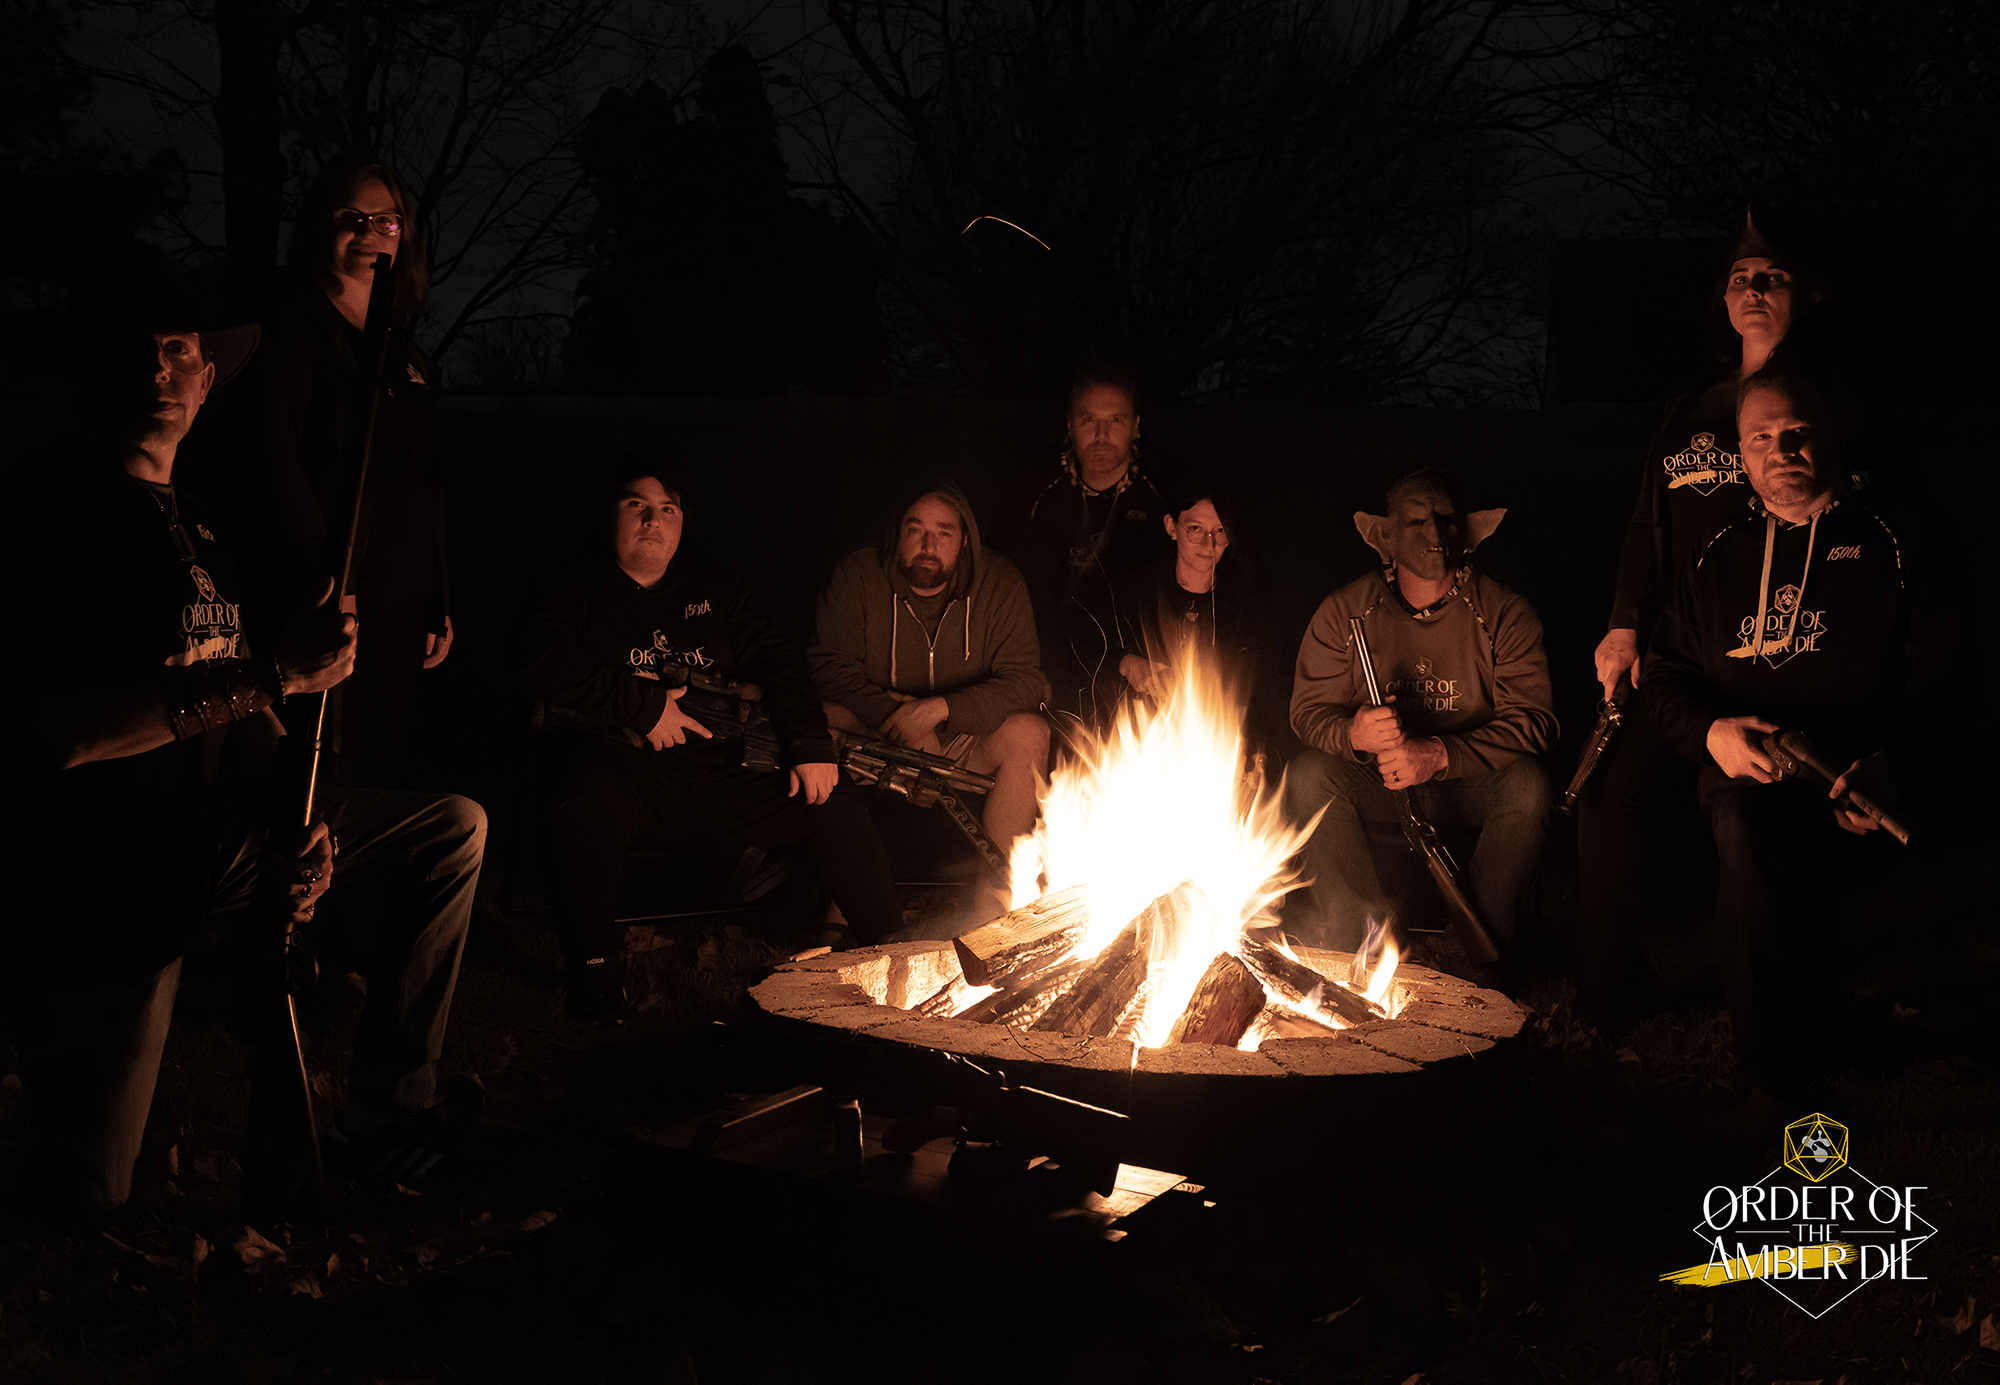 A group of people sitting in the dark around a lit camp firex